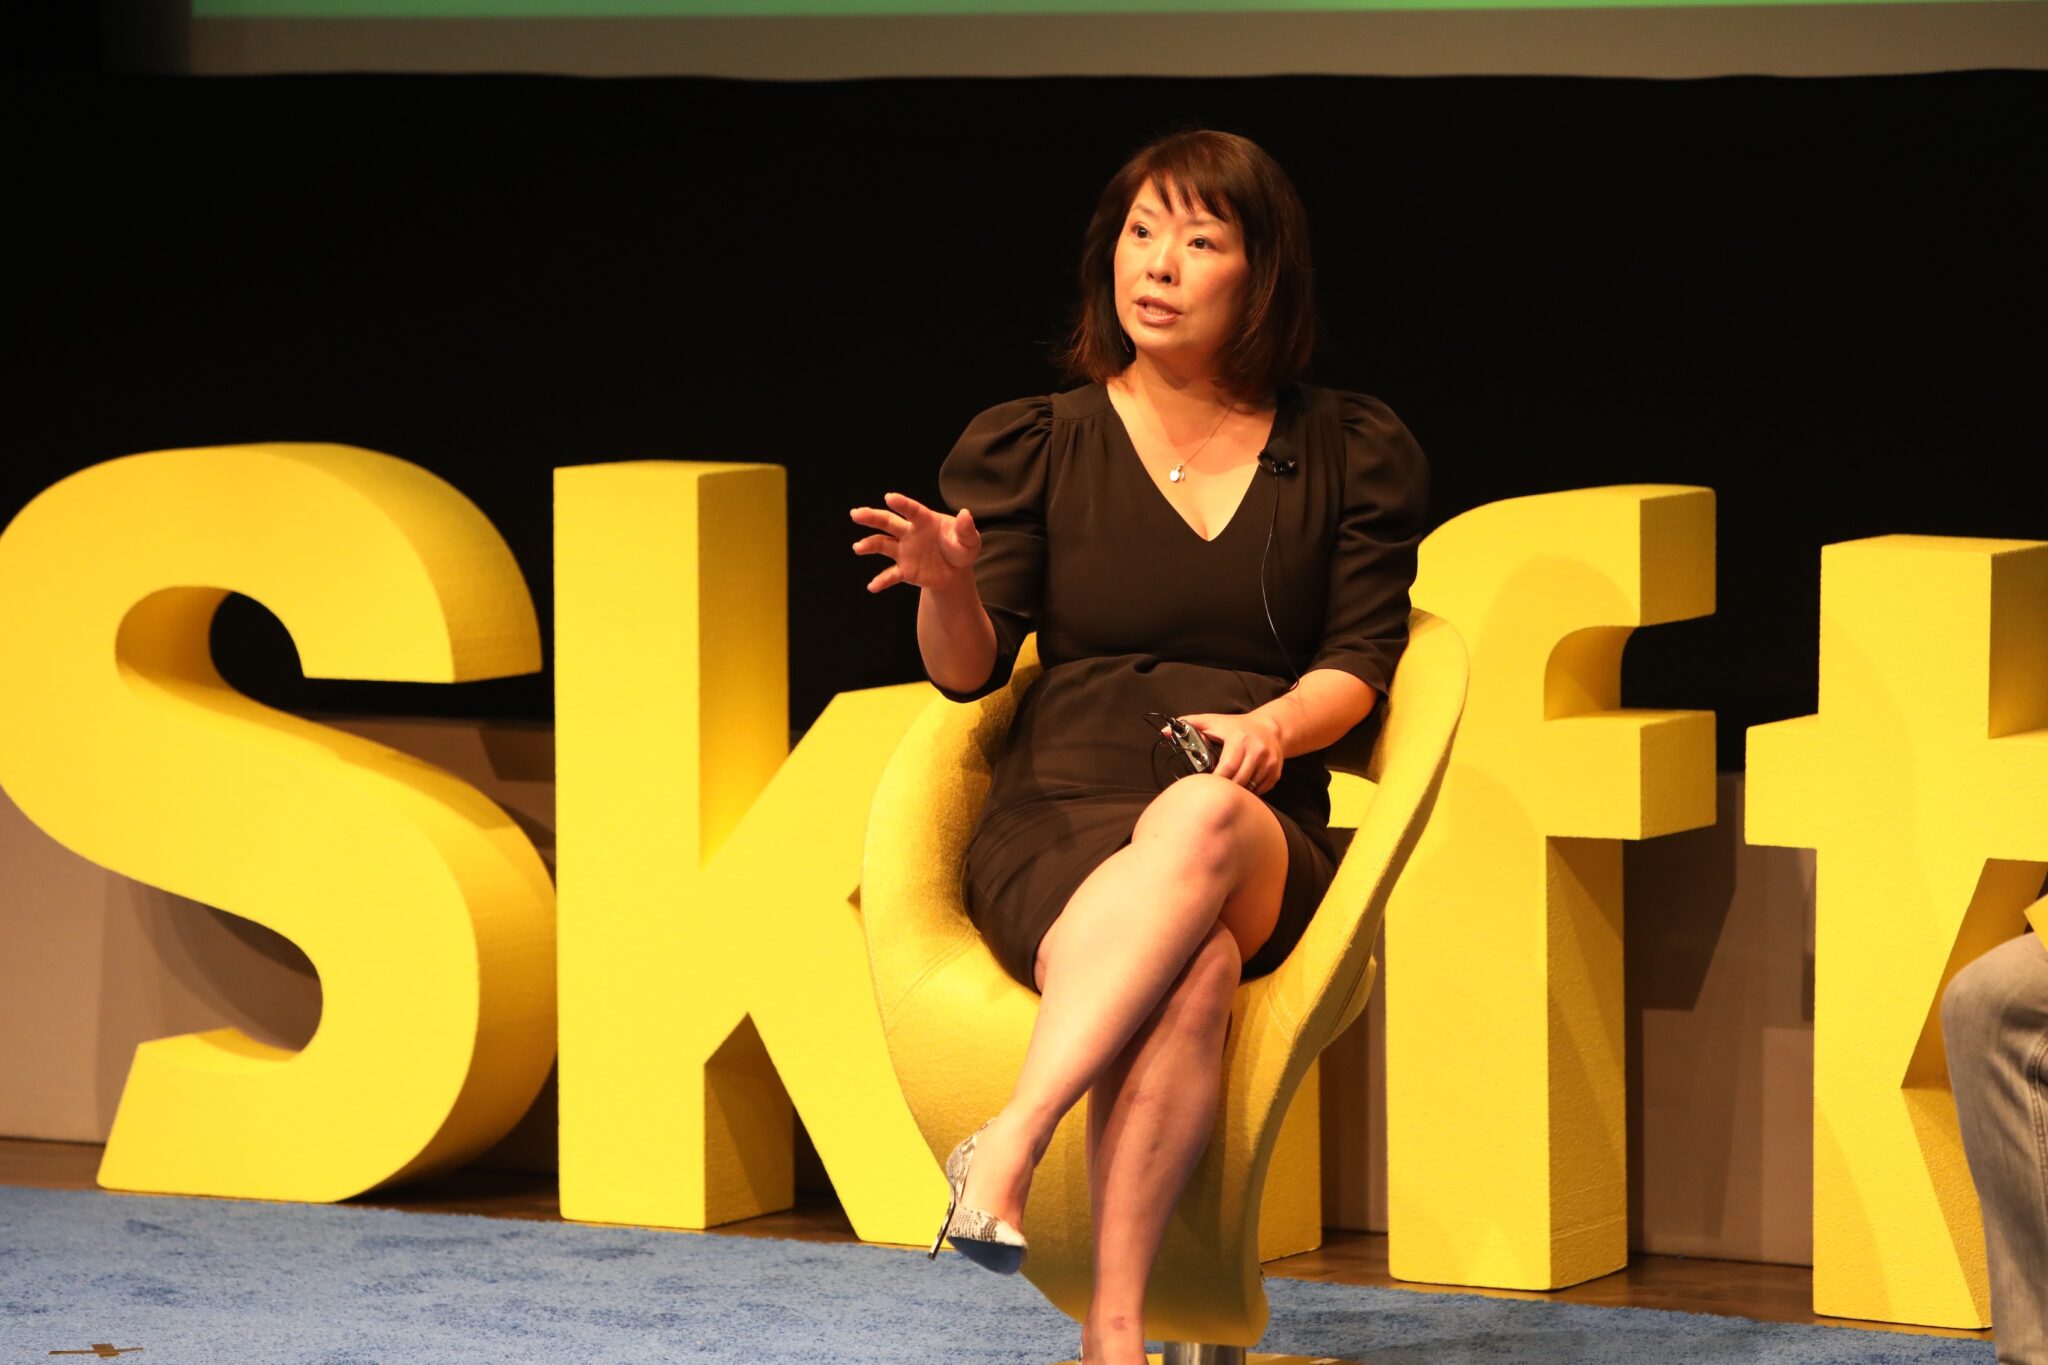 Jennifer Hsieh, vice president of Homes & Villas by Marriott Bonvoy speaking on stage at the Skift Short-Term Rental summit